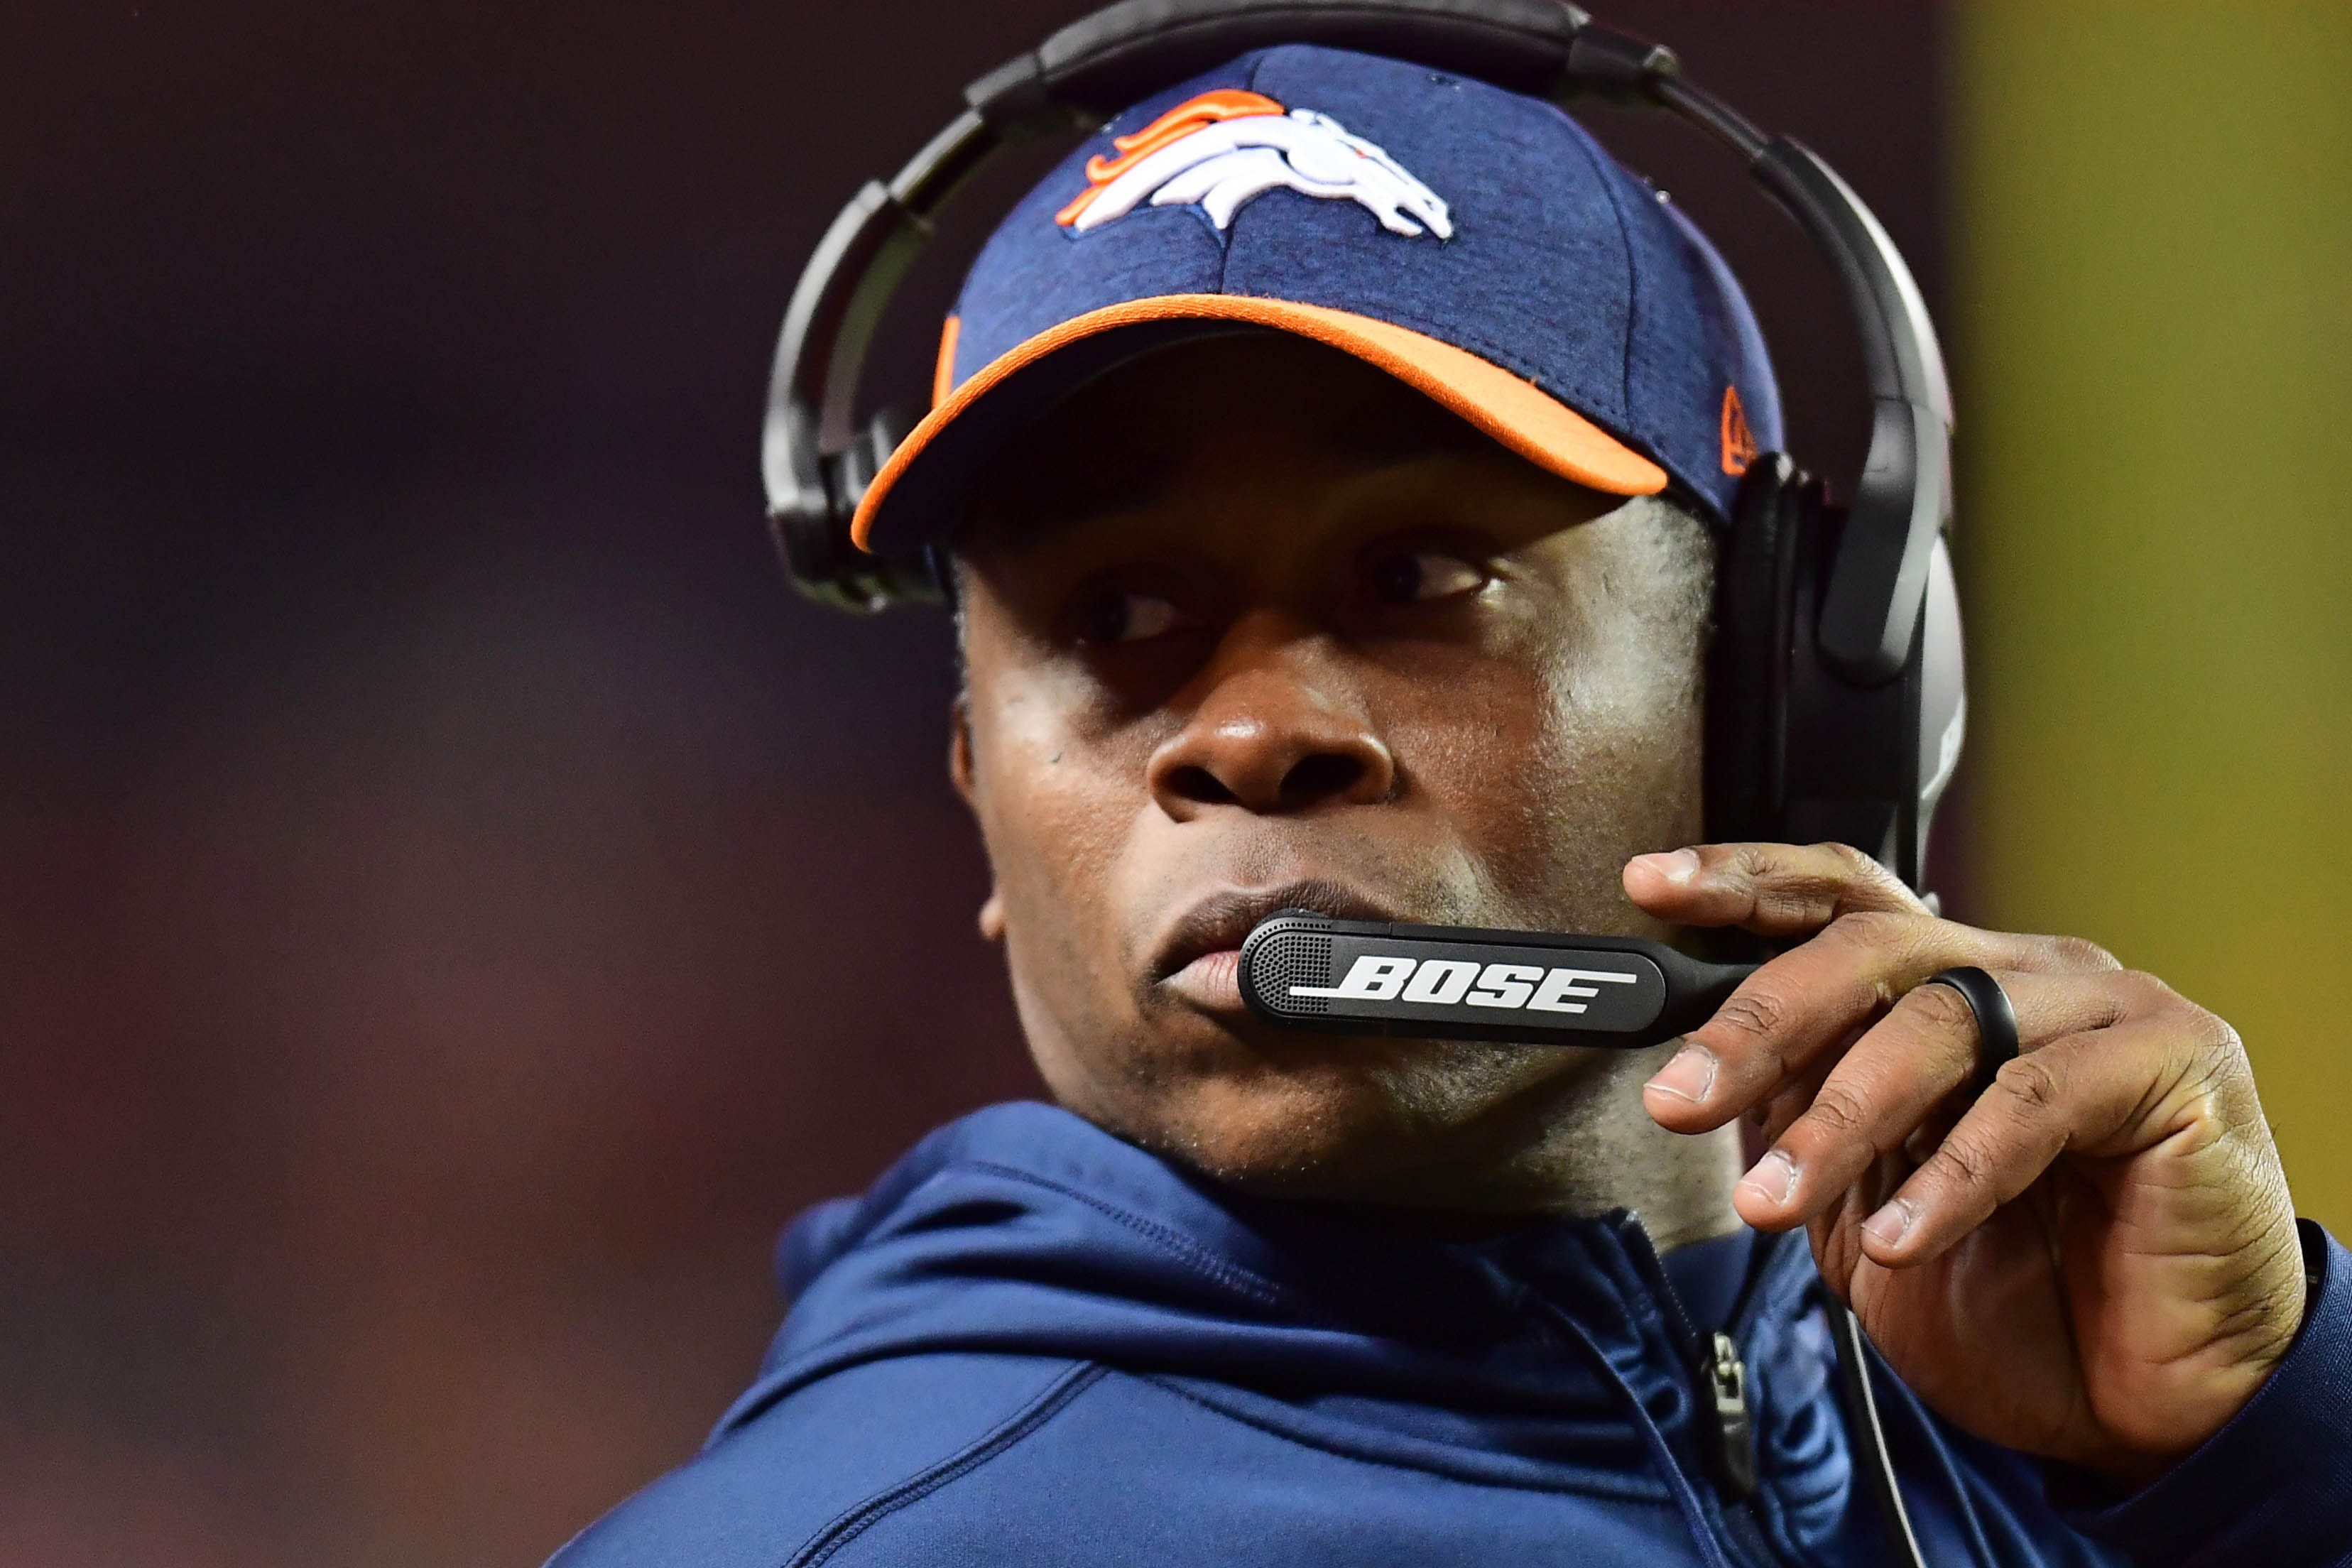 Vance Joseph made a stop as defensive backs coach of the Cincinnati Bengals from 2014-15 on his road to becoming the Denver Broncos' head coach in 2017. He is now defensive coordinator for the Arizona Cardinals.